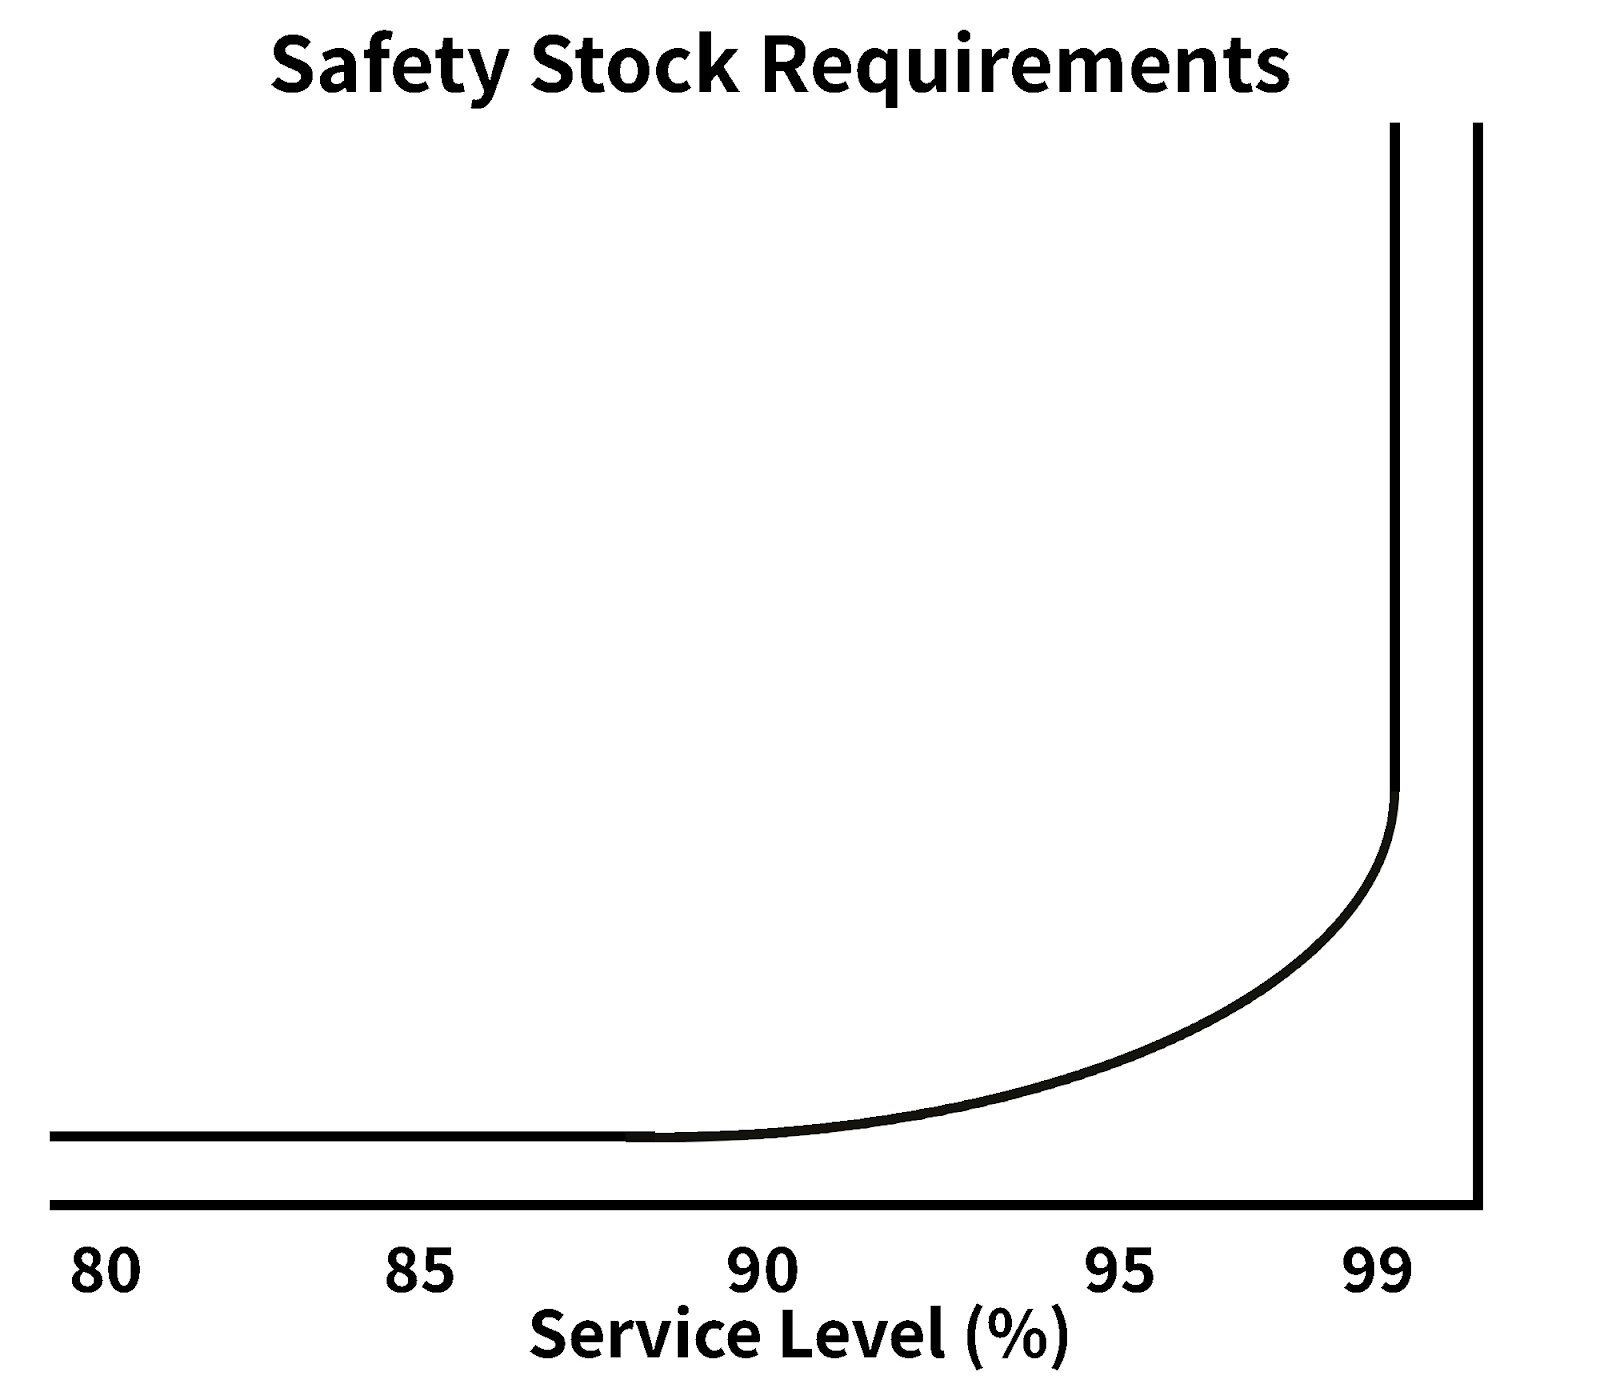 A graph representing safety stock requirements in relation to retail service level percentage. 